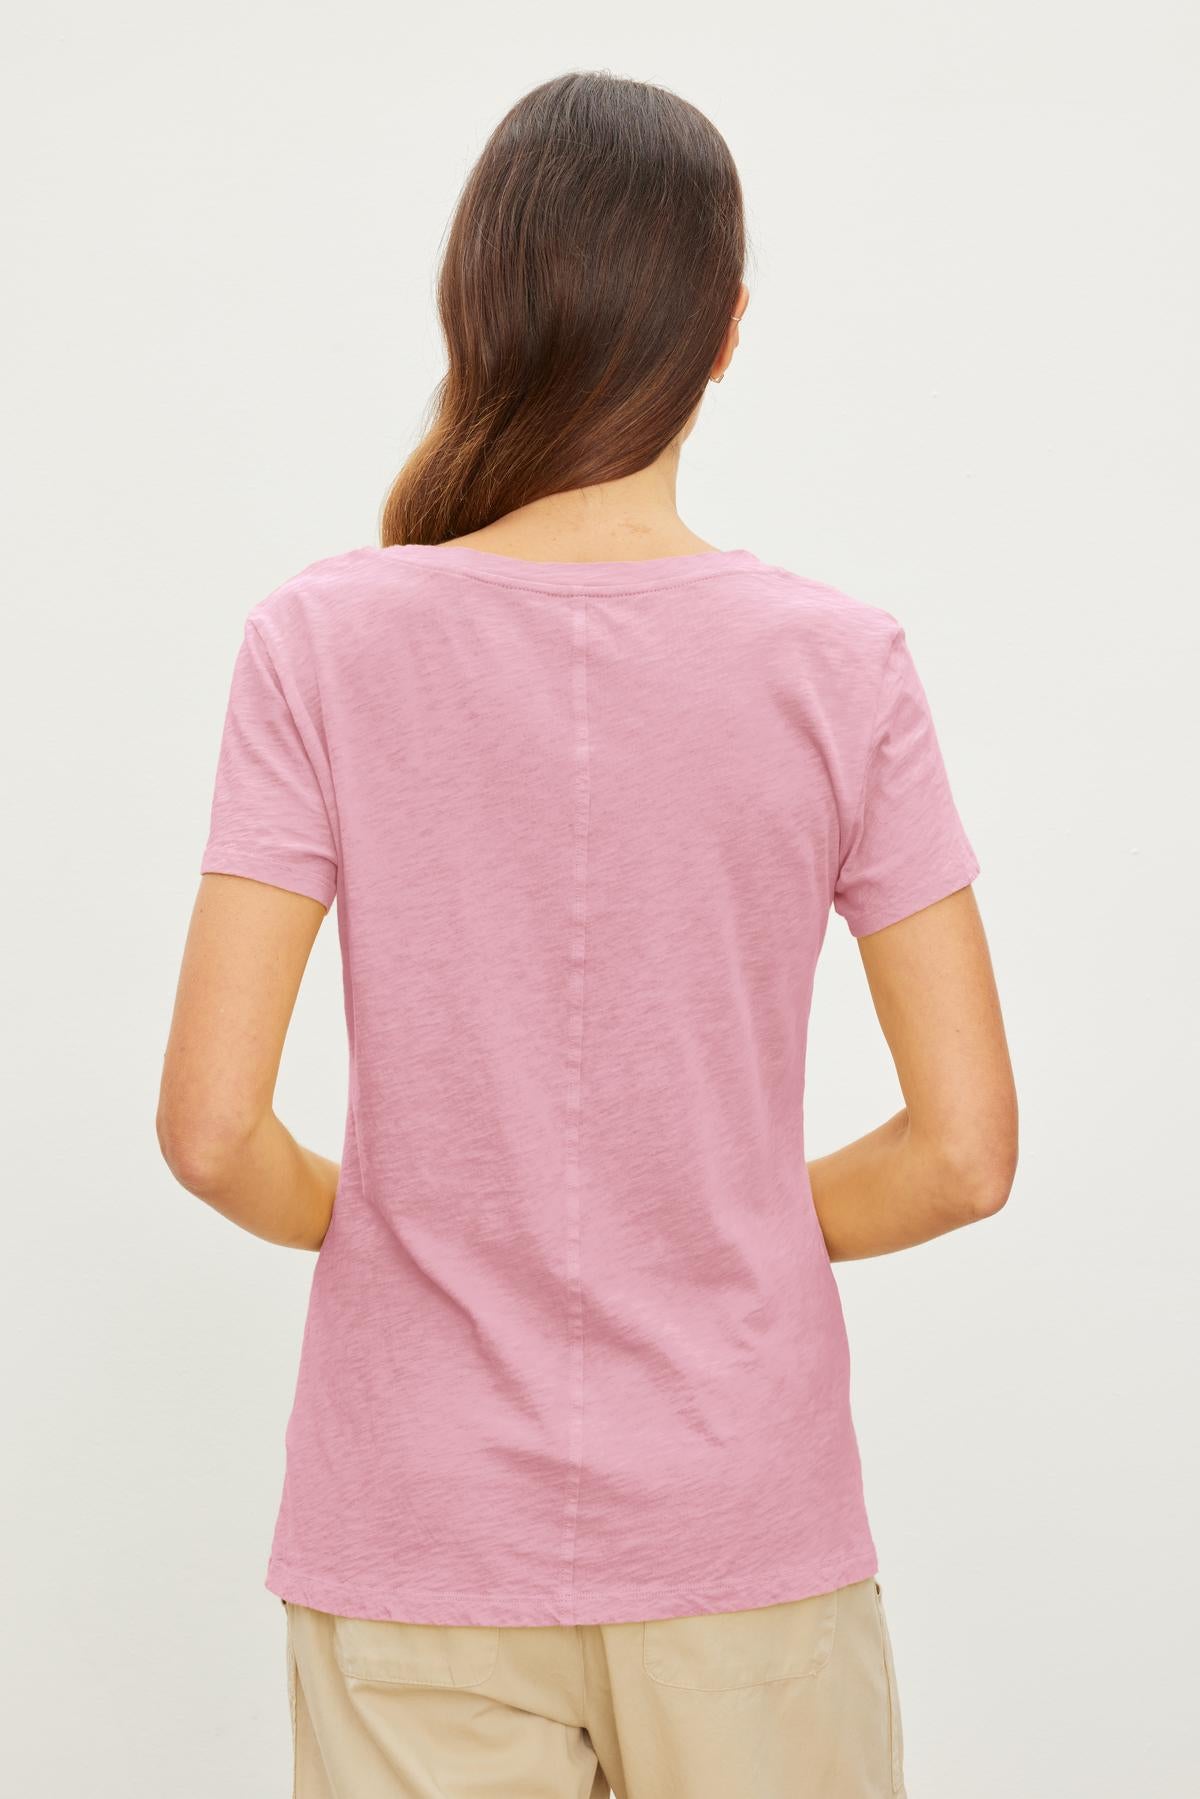 A person with long brown hair stands facing away, wearing a pink Velvet by Graham & Spencer LILITH TEE known for its luxurious softness and beige pants against a plain white background.-37241138839745